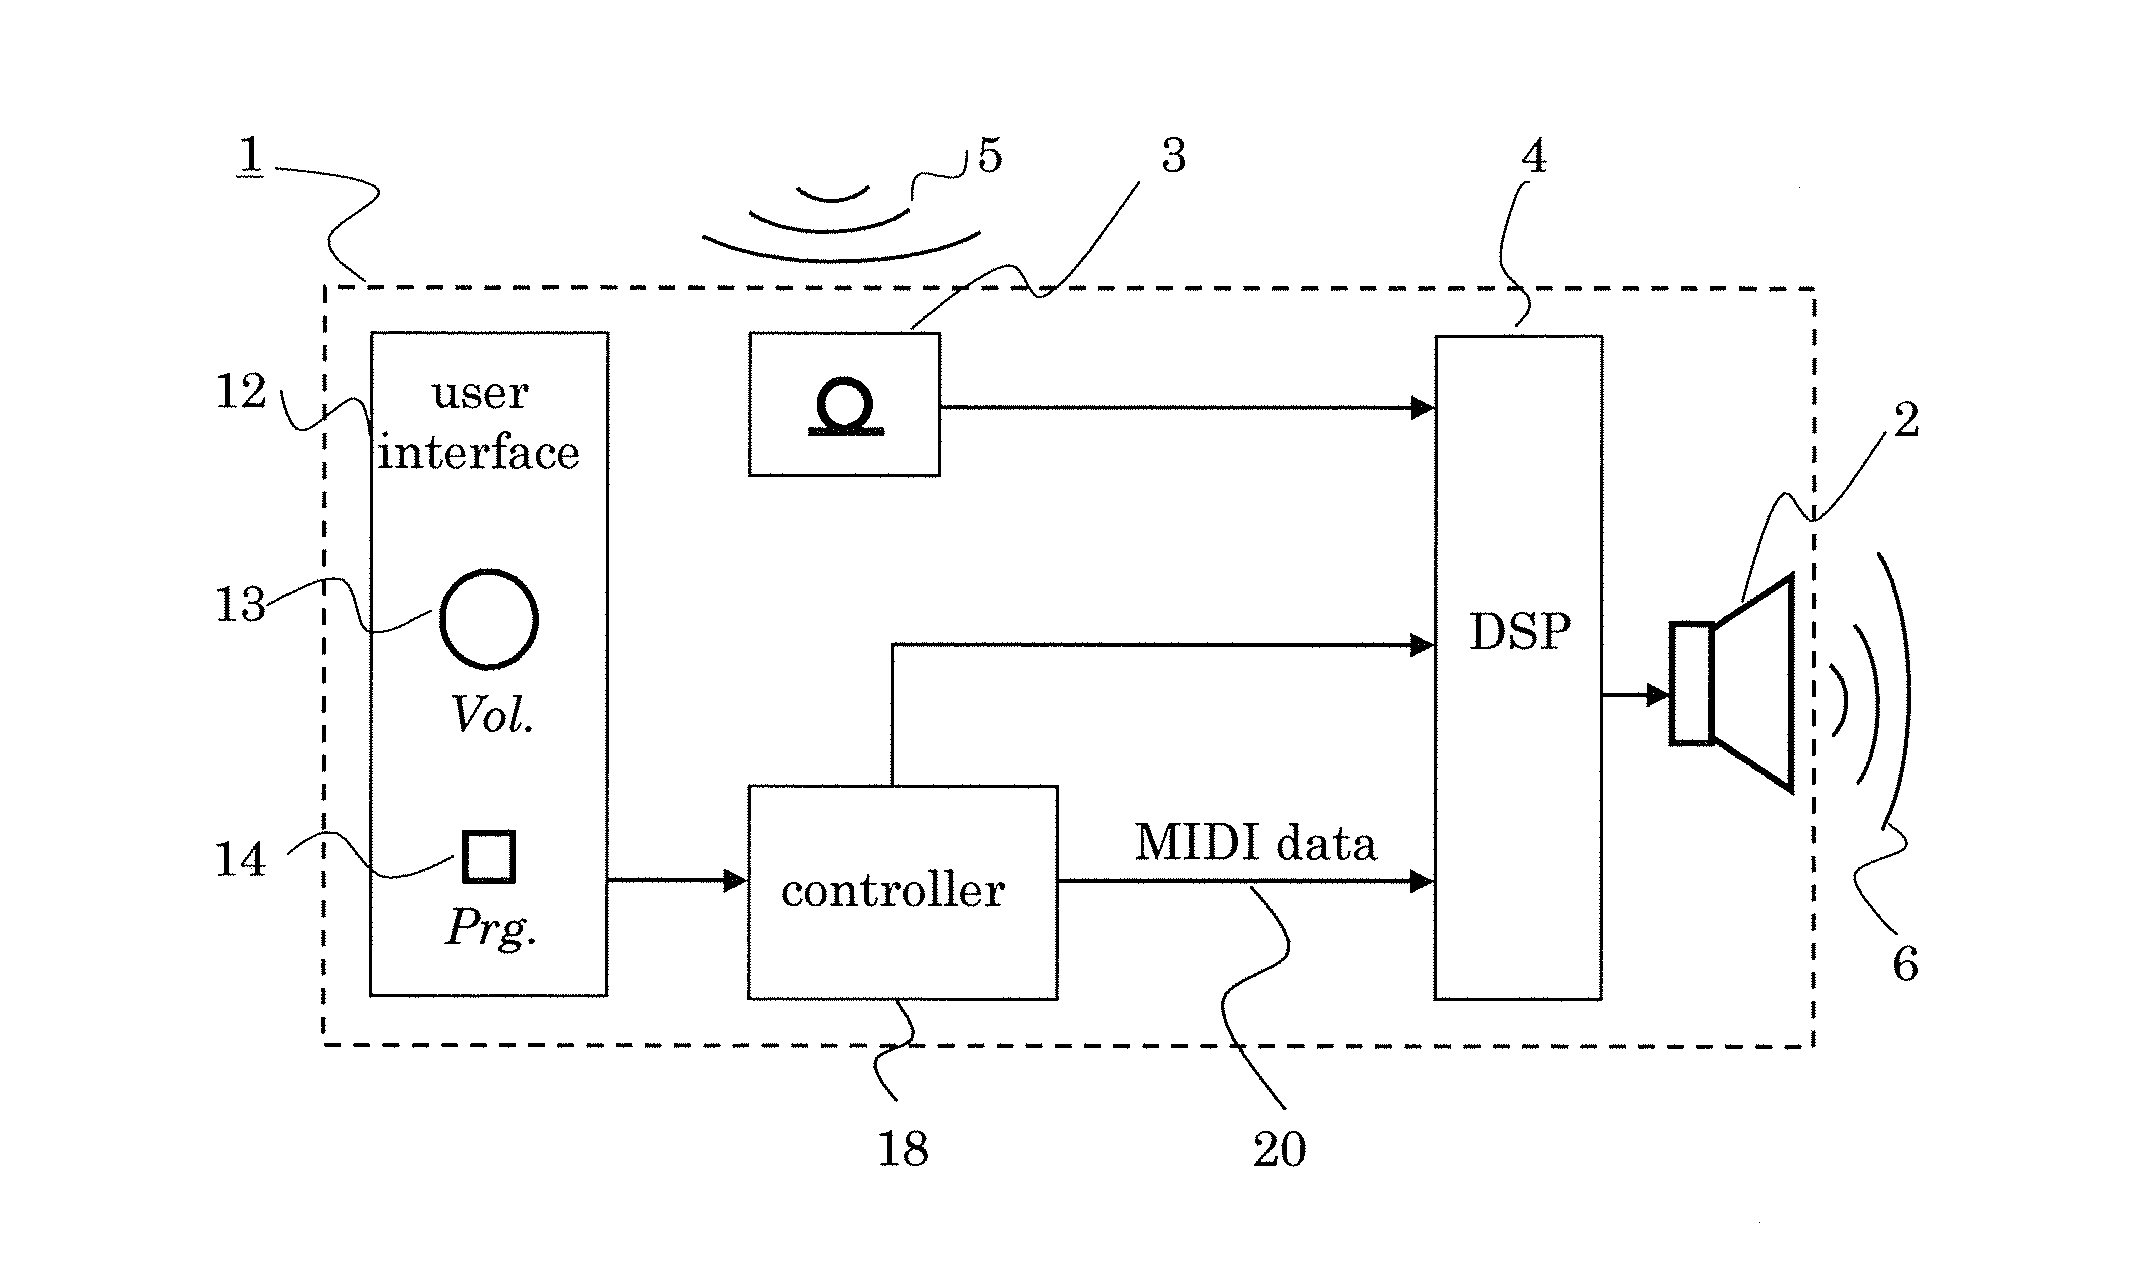 Midi-compatible hearing device and reproduction of speech sound in a hearing device